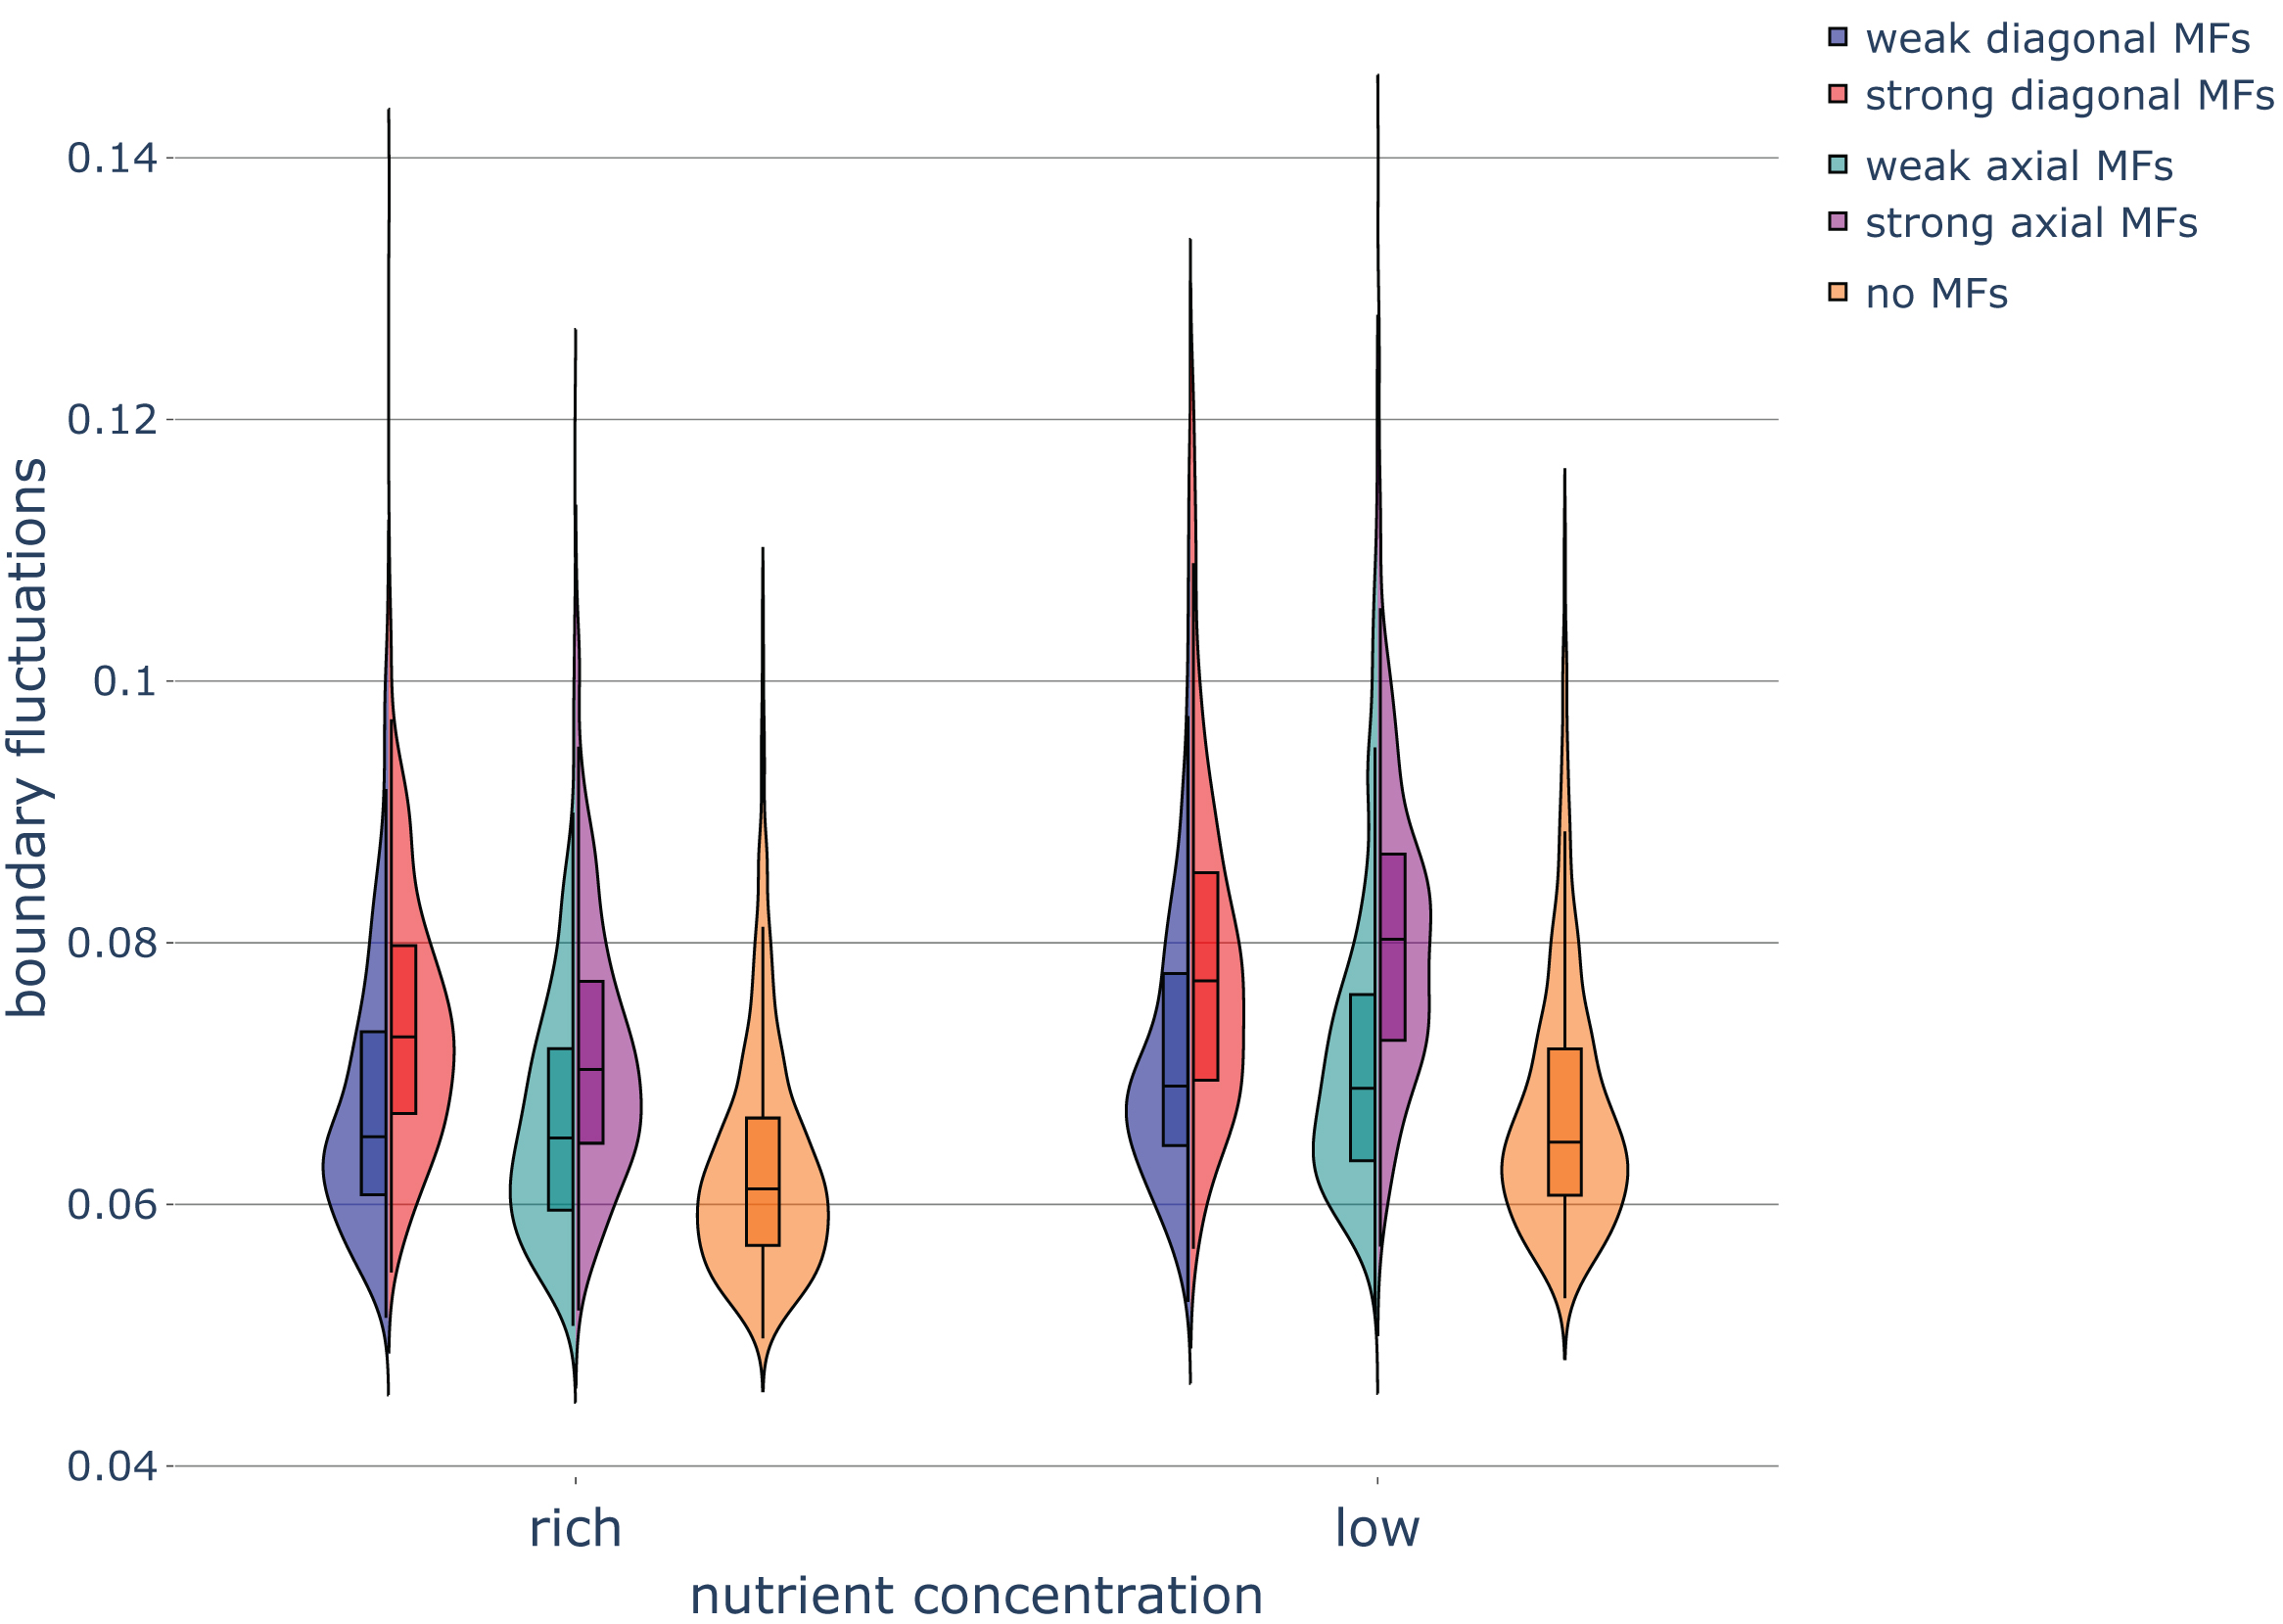 Boundary fluctuations of diploid colonies without pseudohyphal growth under different nutrient and magnetic field conditions. Violin plots of the boundary fluctuations of colonies in various nutrient conditions and exposed to magnetic fields (MFs) of different strengths and directions. Parameters were set as follows: rich-nutrient condition: START_NUTRS = 20, low-nutrient condition: START_NUTRS = 2; nSteps = 10; paxial = 0; no MFs: MF_STRENGTH = 0, weak MFs: MF_STRENGTH = 0.5, strong MFs: MF_STRENGTH = 1.